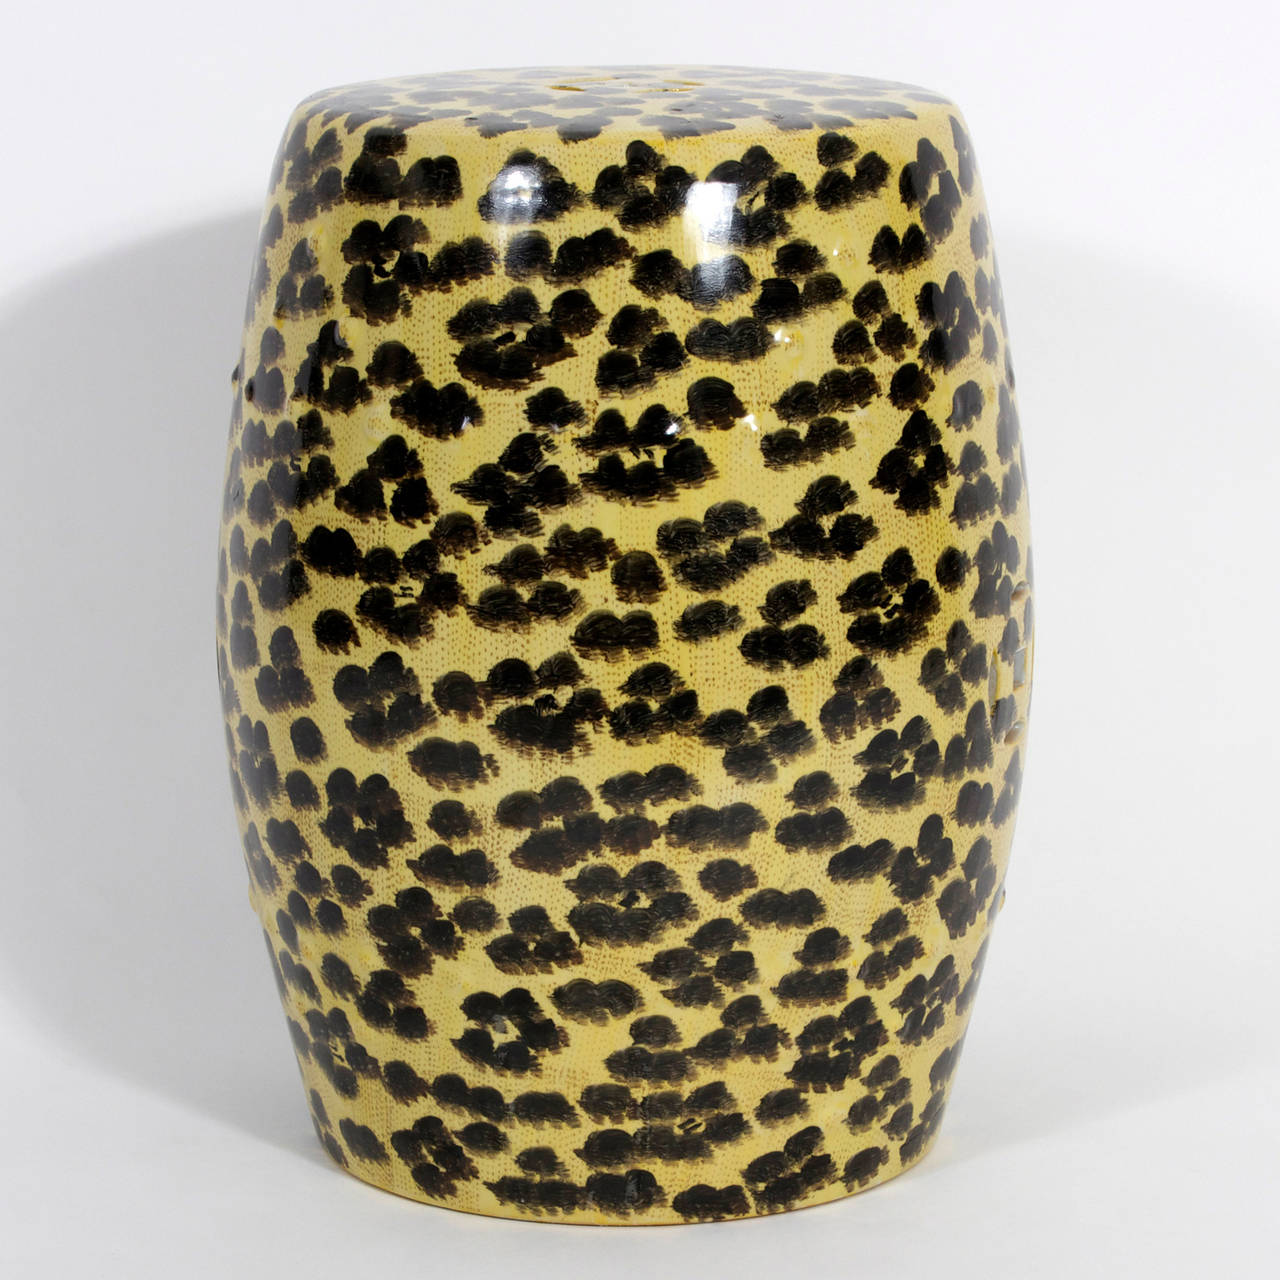 Bold and beautiful porcelain classic form garden seat with hand-painted leopard print pattern. Used as a seat or drink stand for a traditional or modern interior.